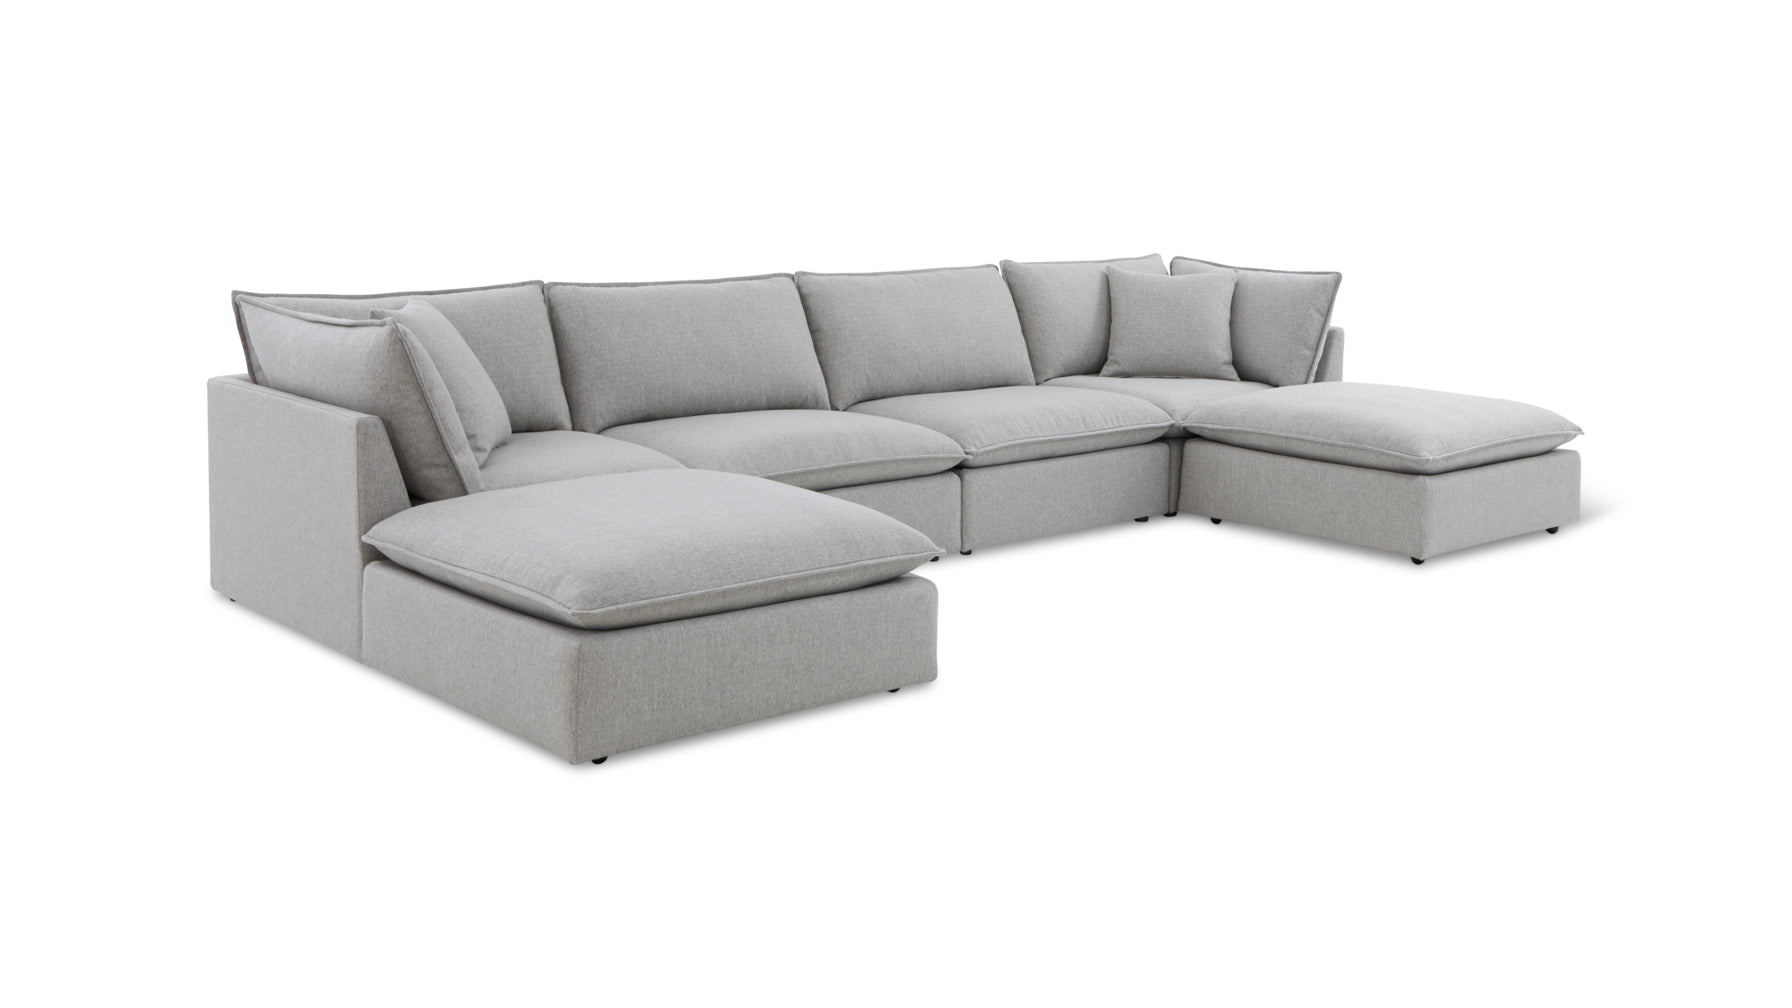 Chill Time 6-Piece Modular U-Shaped Sectional, Heather - Image 2